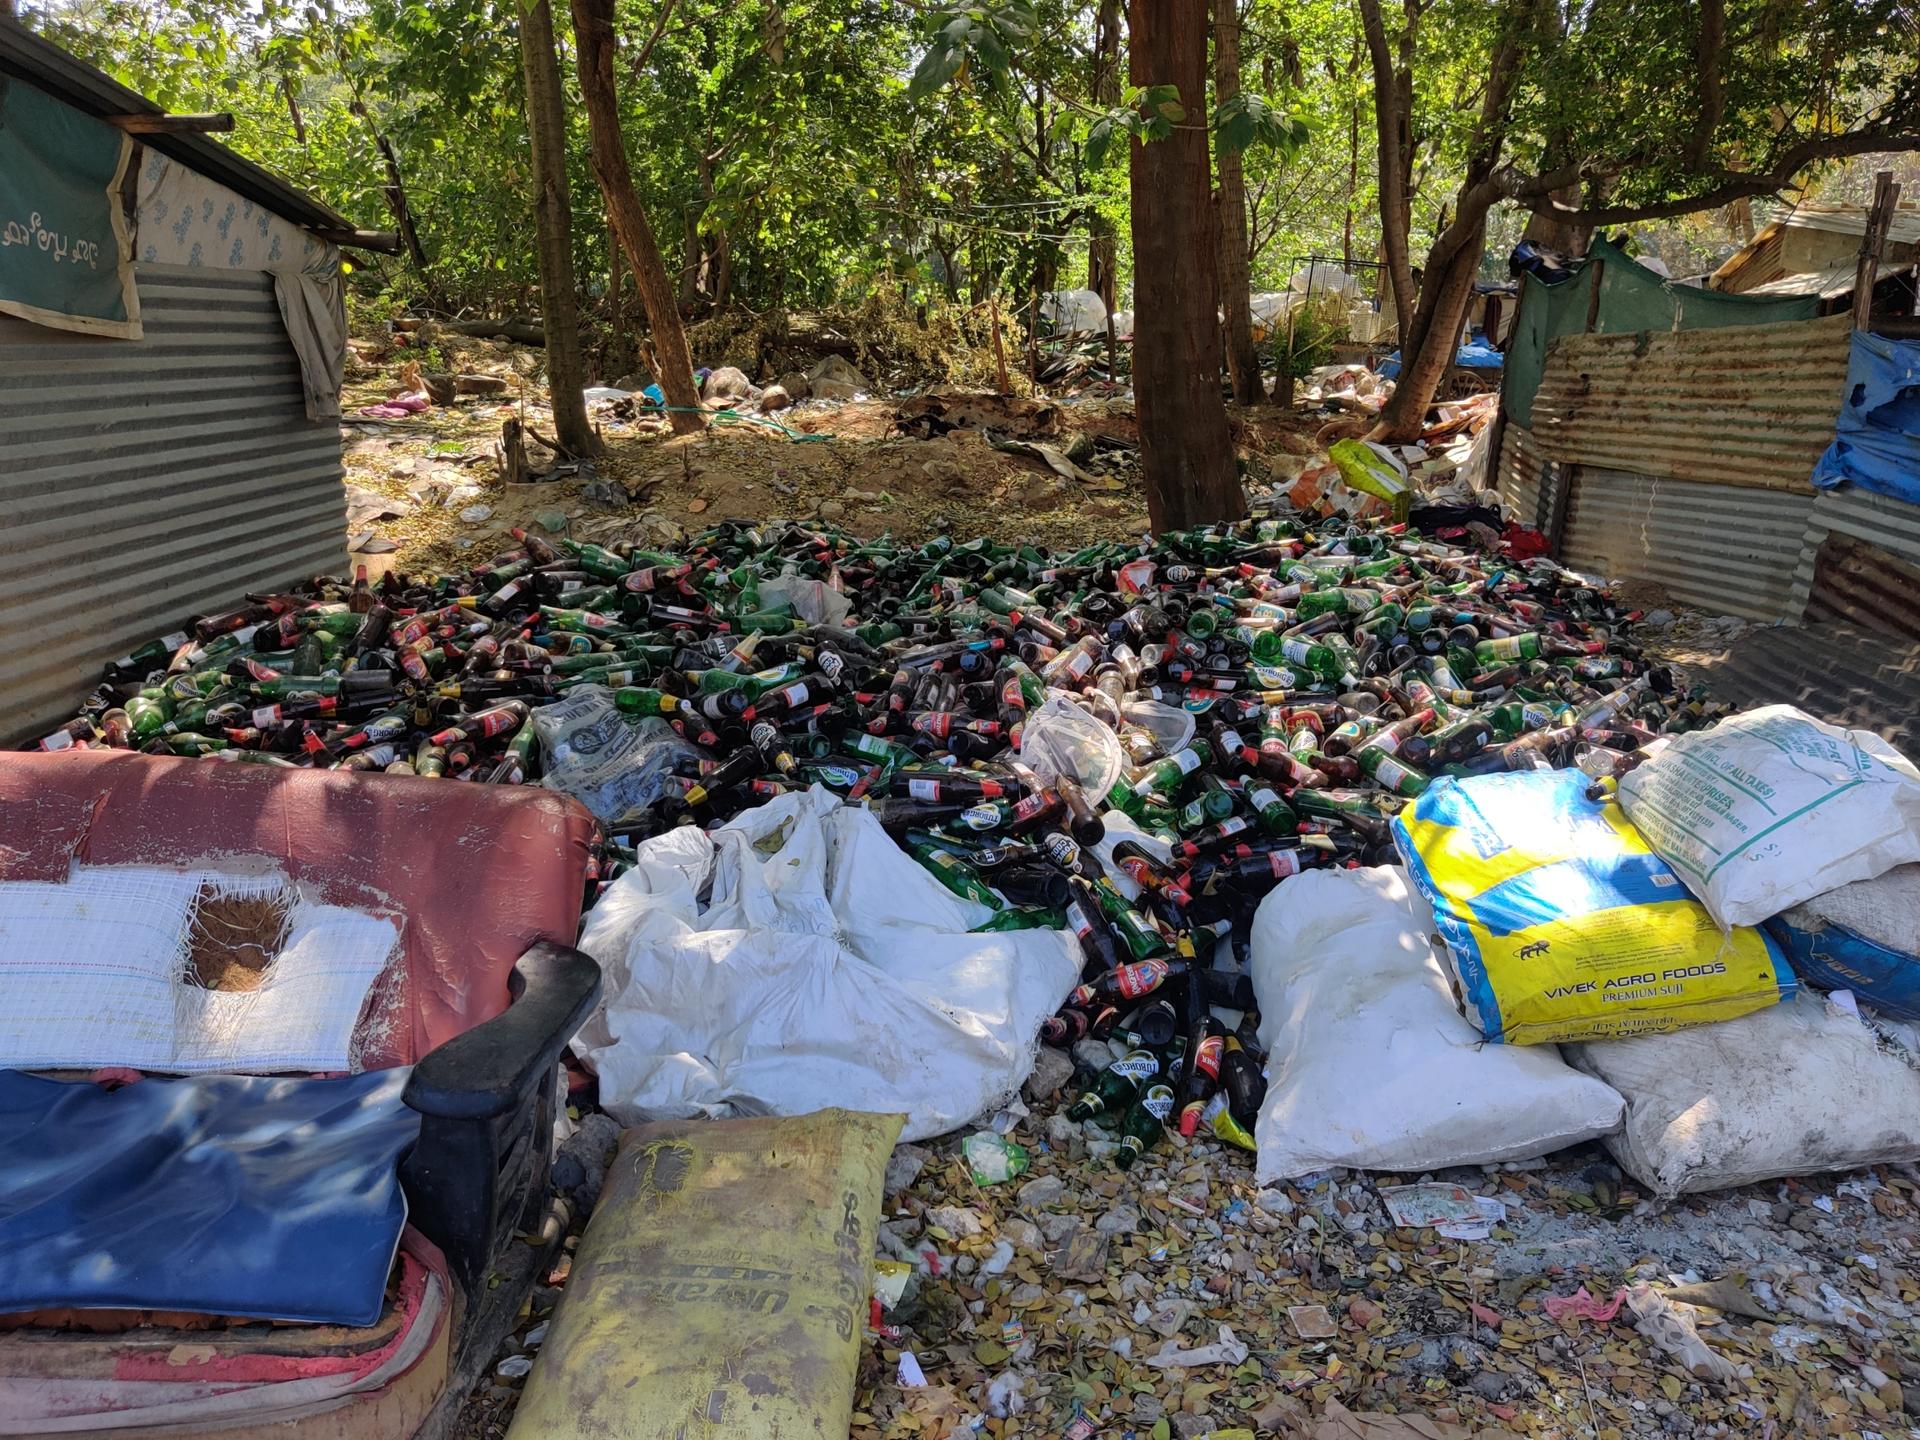 Trash segregators in Bangalore, India, pile up glass bottles to one side as they separate waste.